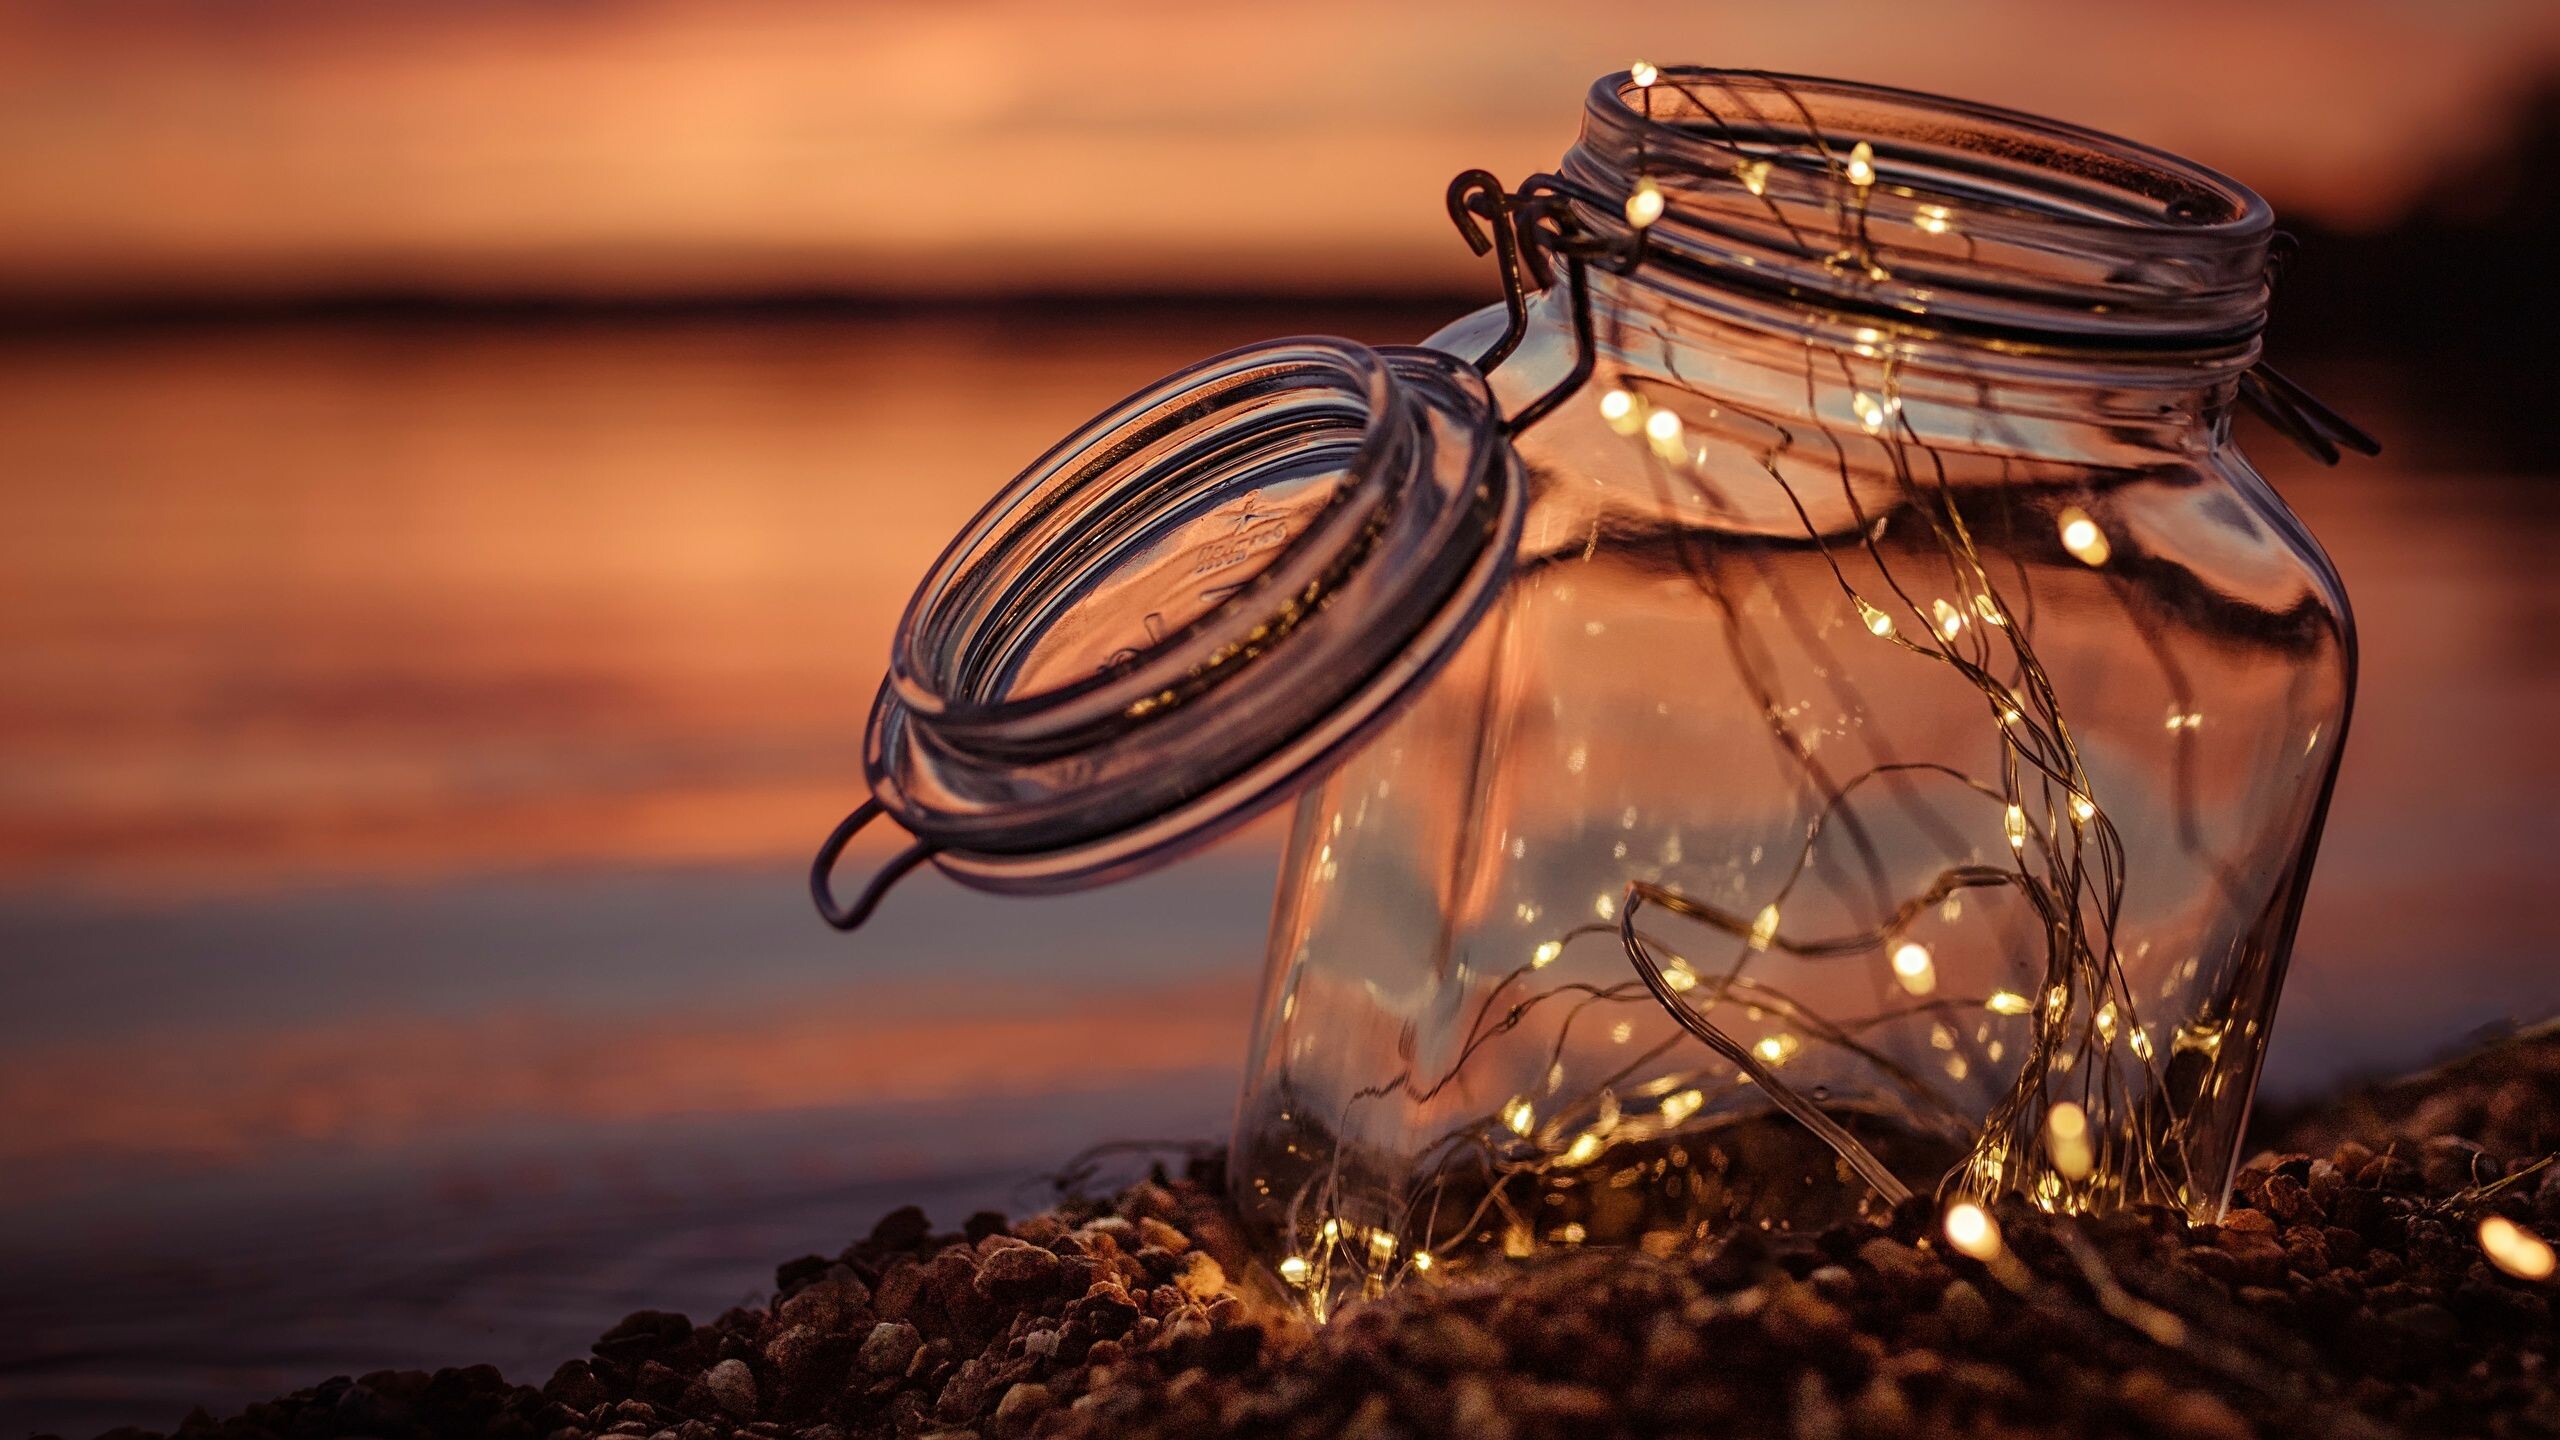 Fairy Lights: Small electric bulbs on a string used as decoration. 2560x1440 HD Background.